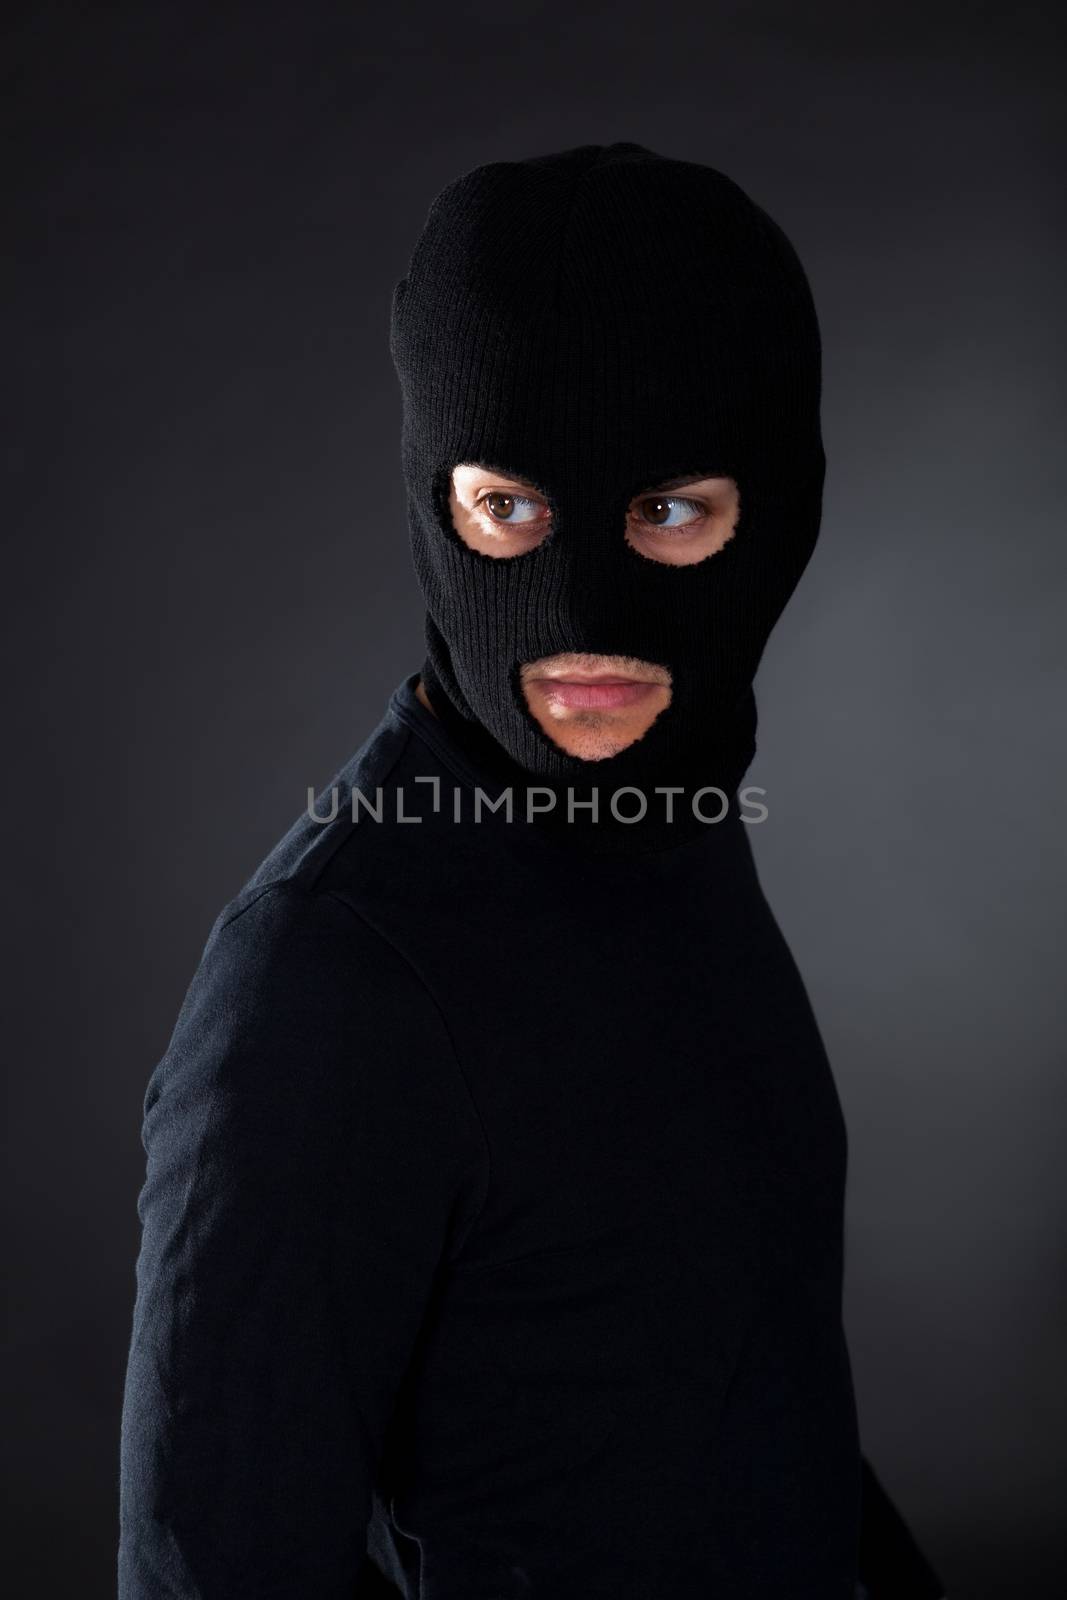 Thief wearing a balaclava dressed in blacked moving stealthily through the darkness as he prepares to commit robbery